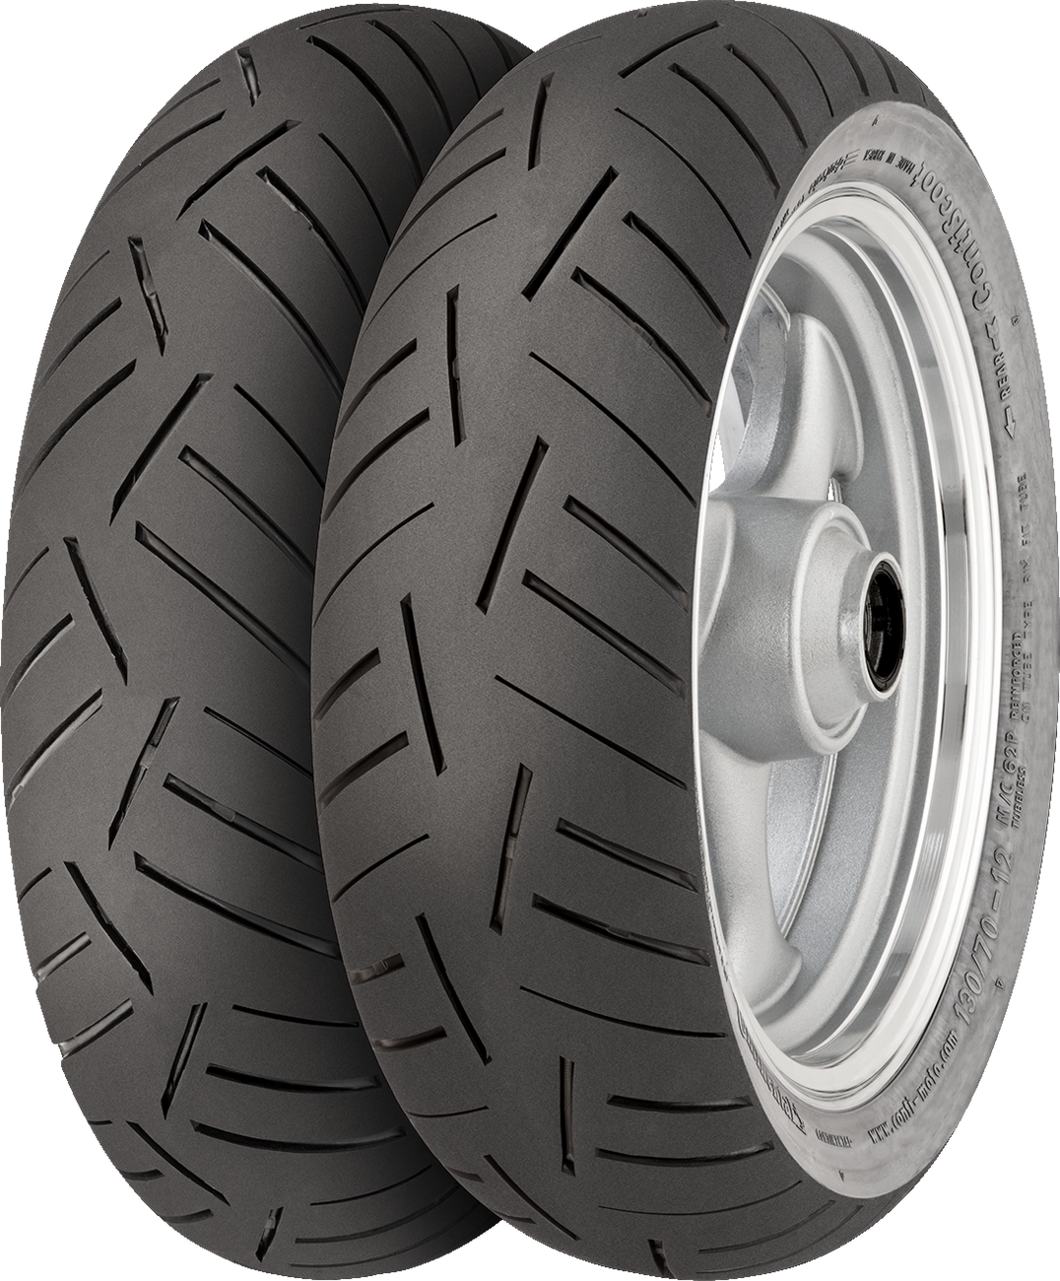 Tire - ContiScoot - Front/Rear - 3.50-10 - 59P